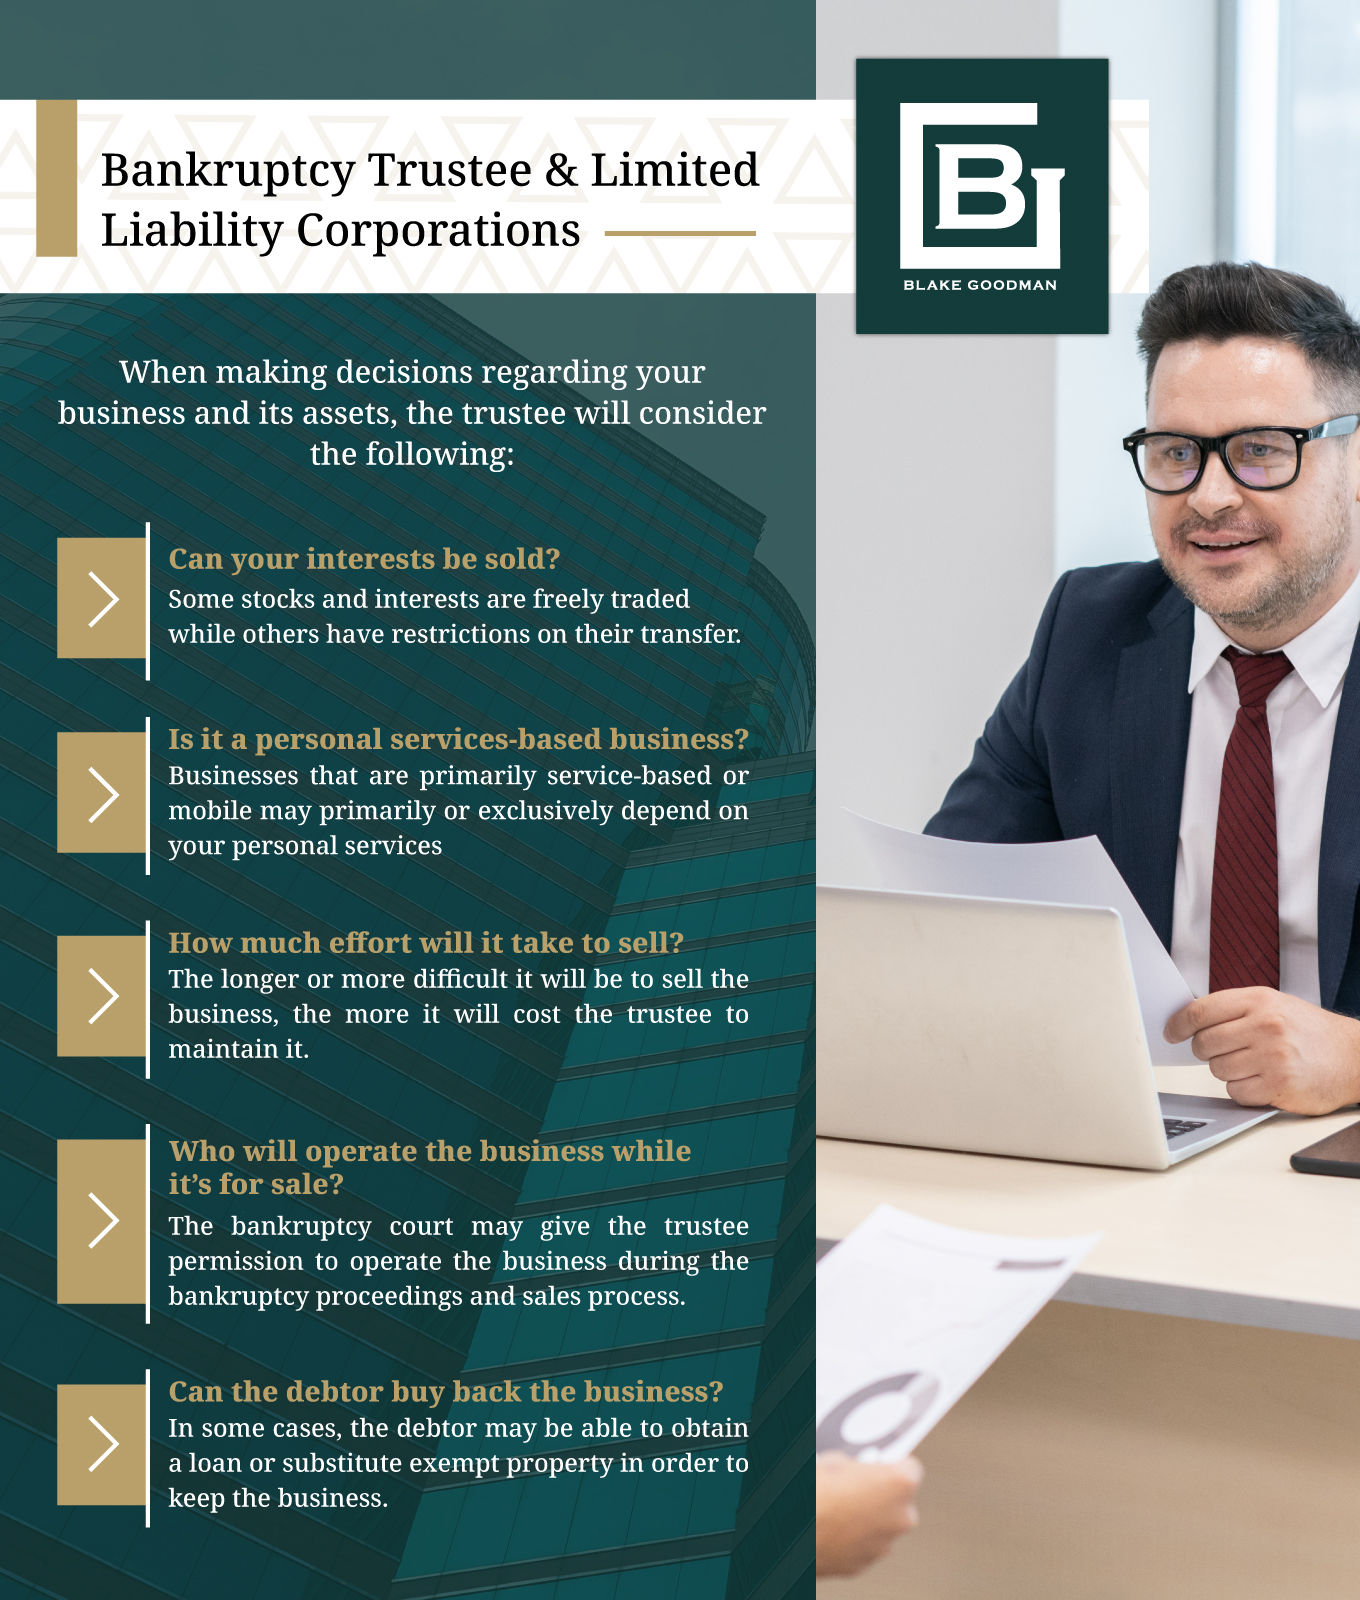 An infographic about Bankruptcy Trustee & Limited Liability Corporations